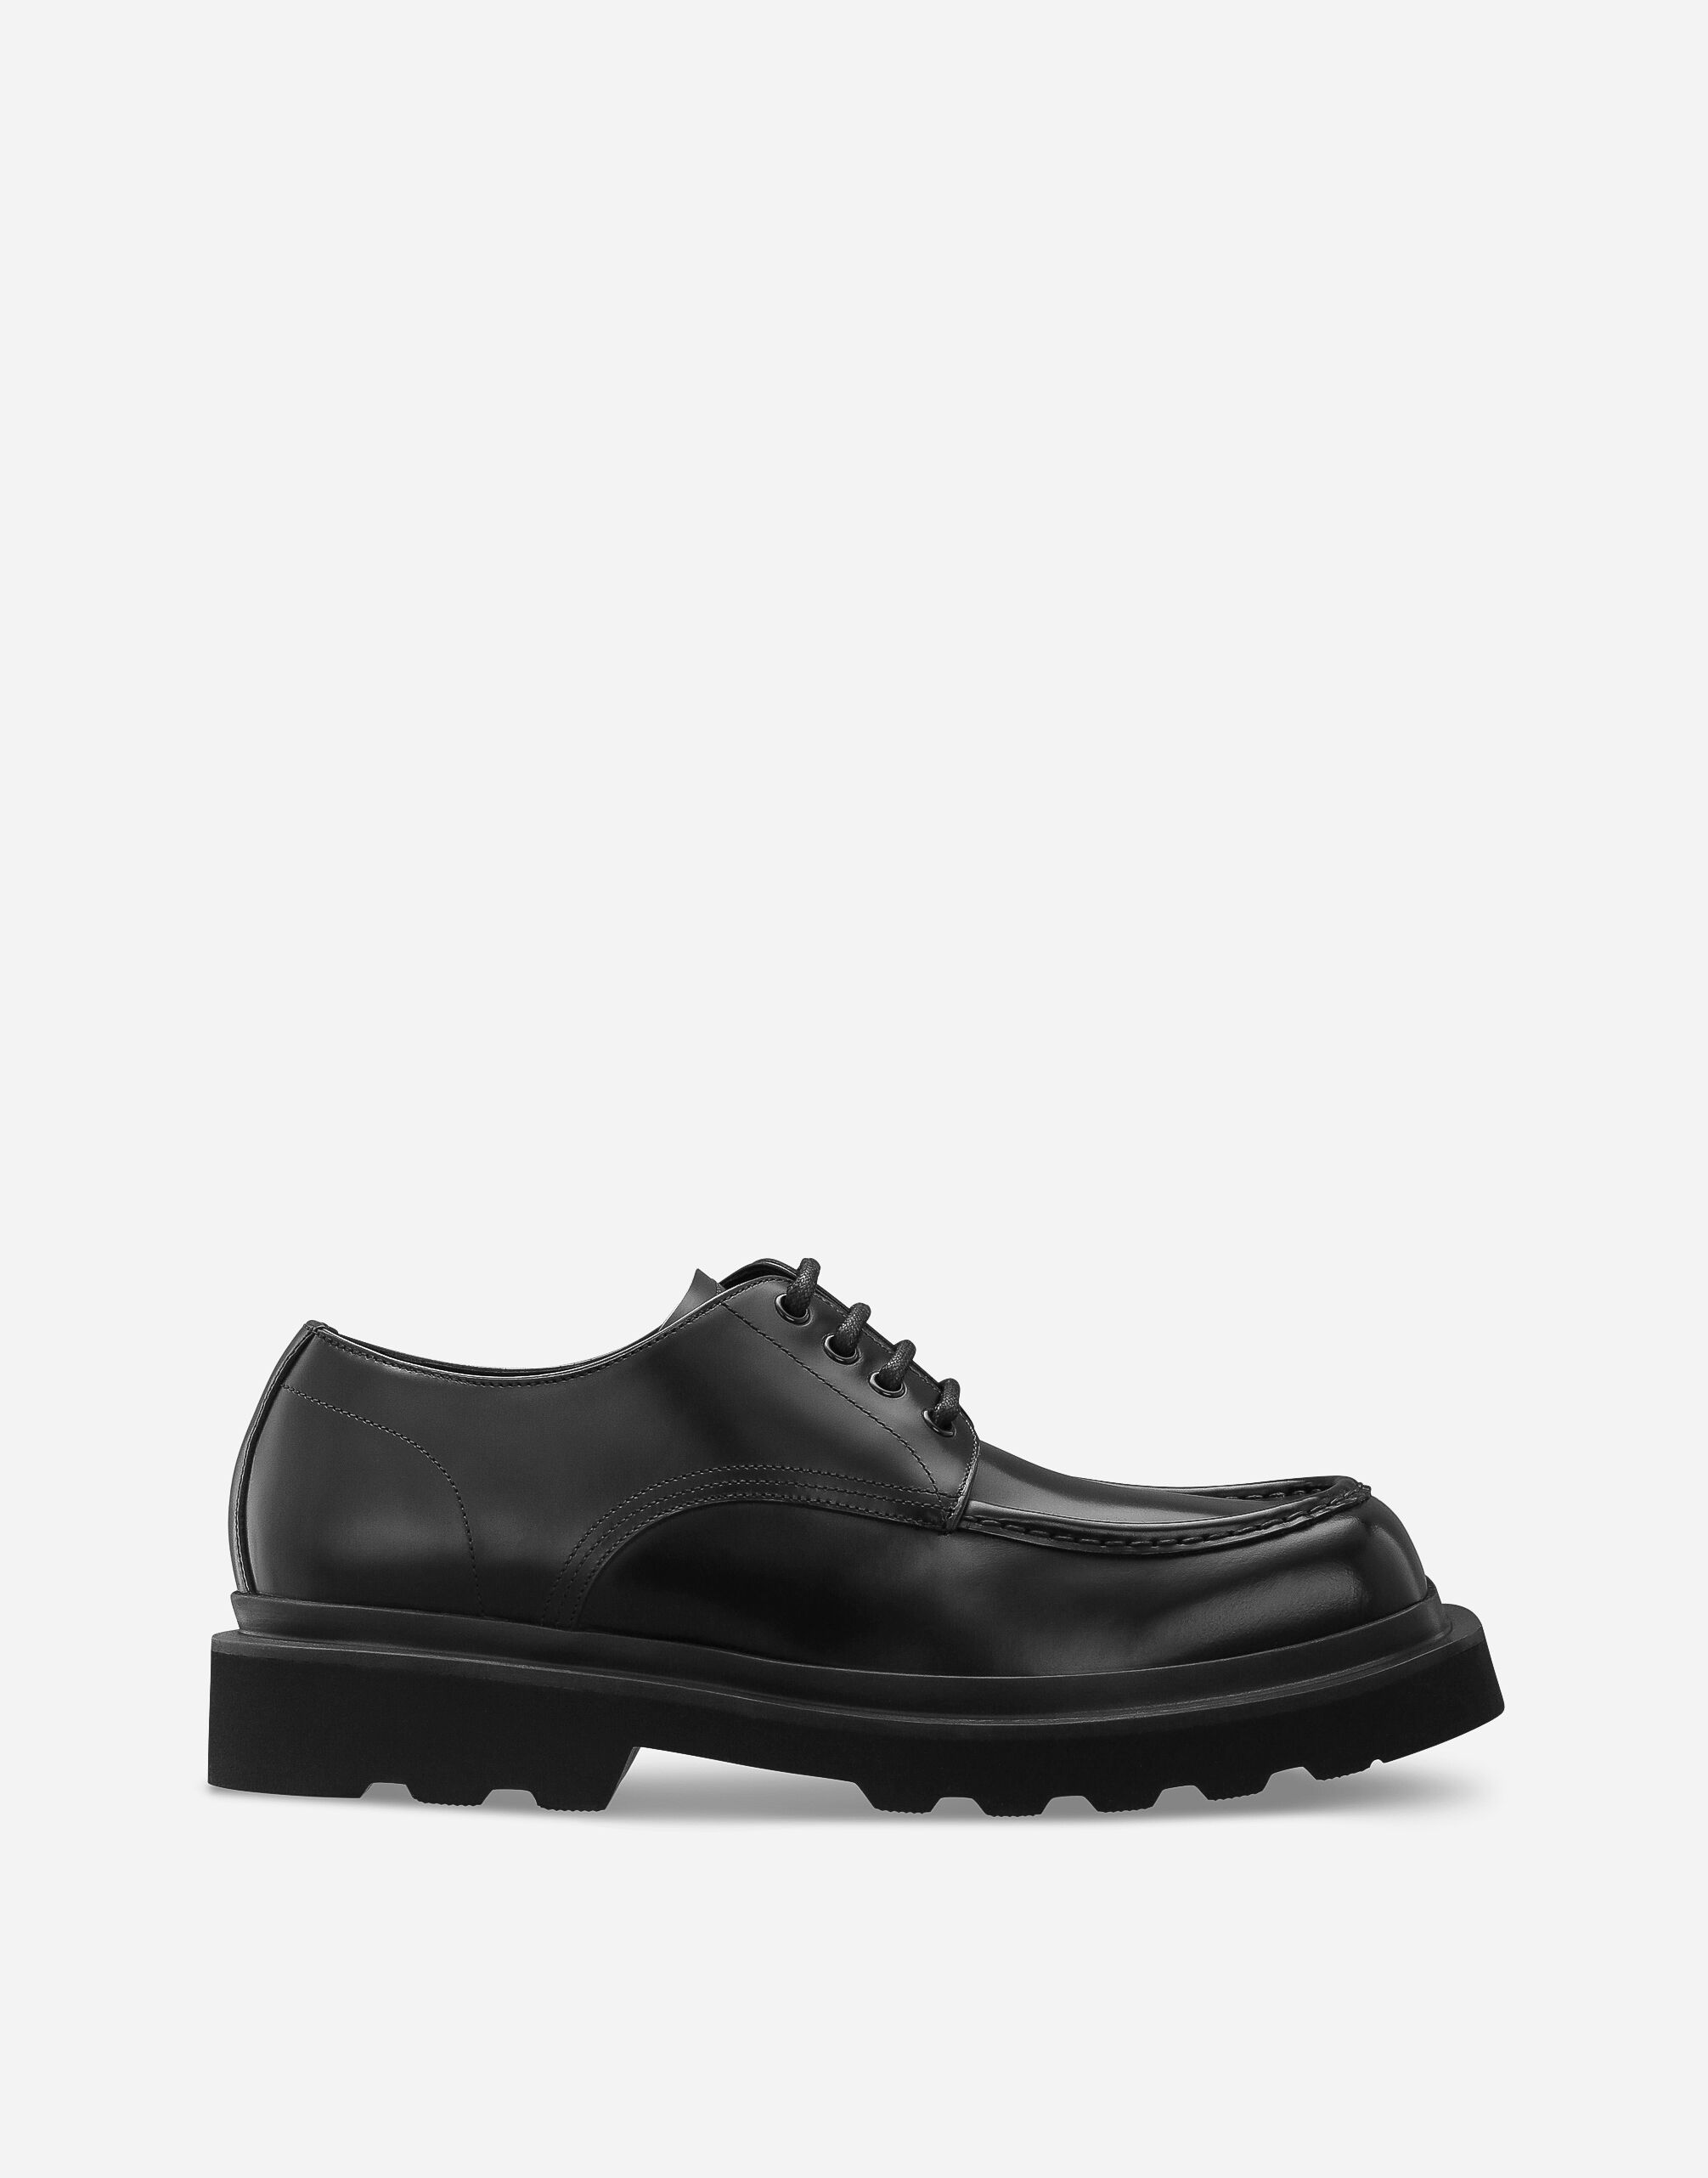 Dolce & Gabbana Calfskin Derby shoes Black G2PS2THJMOW